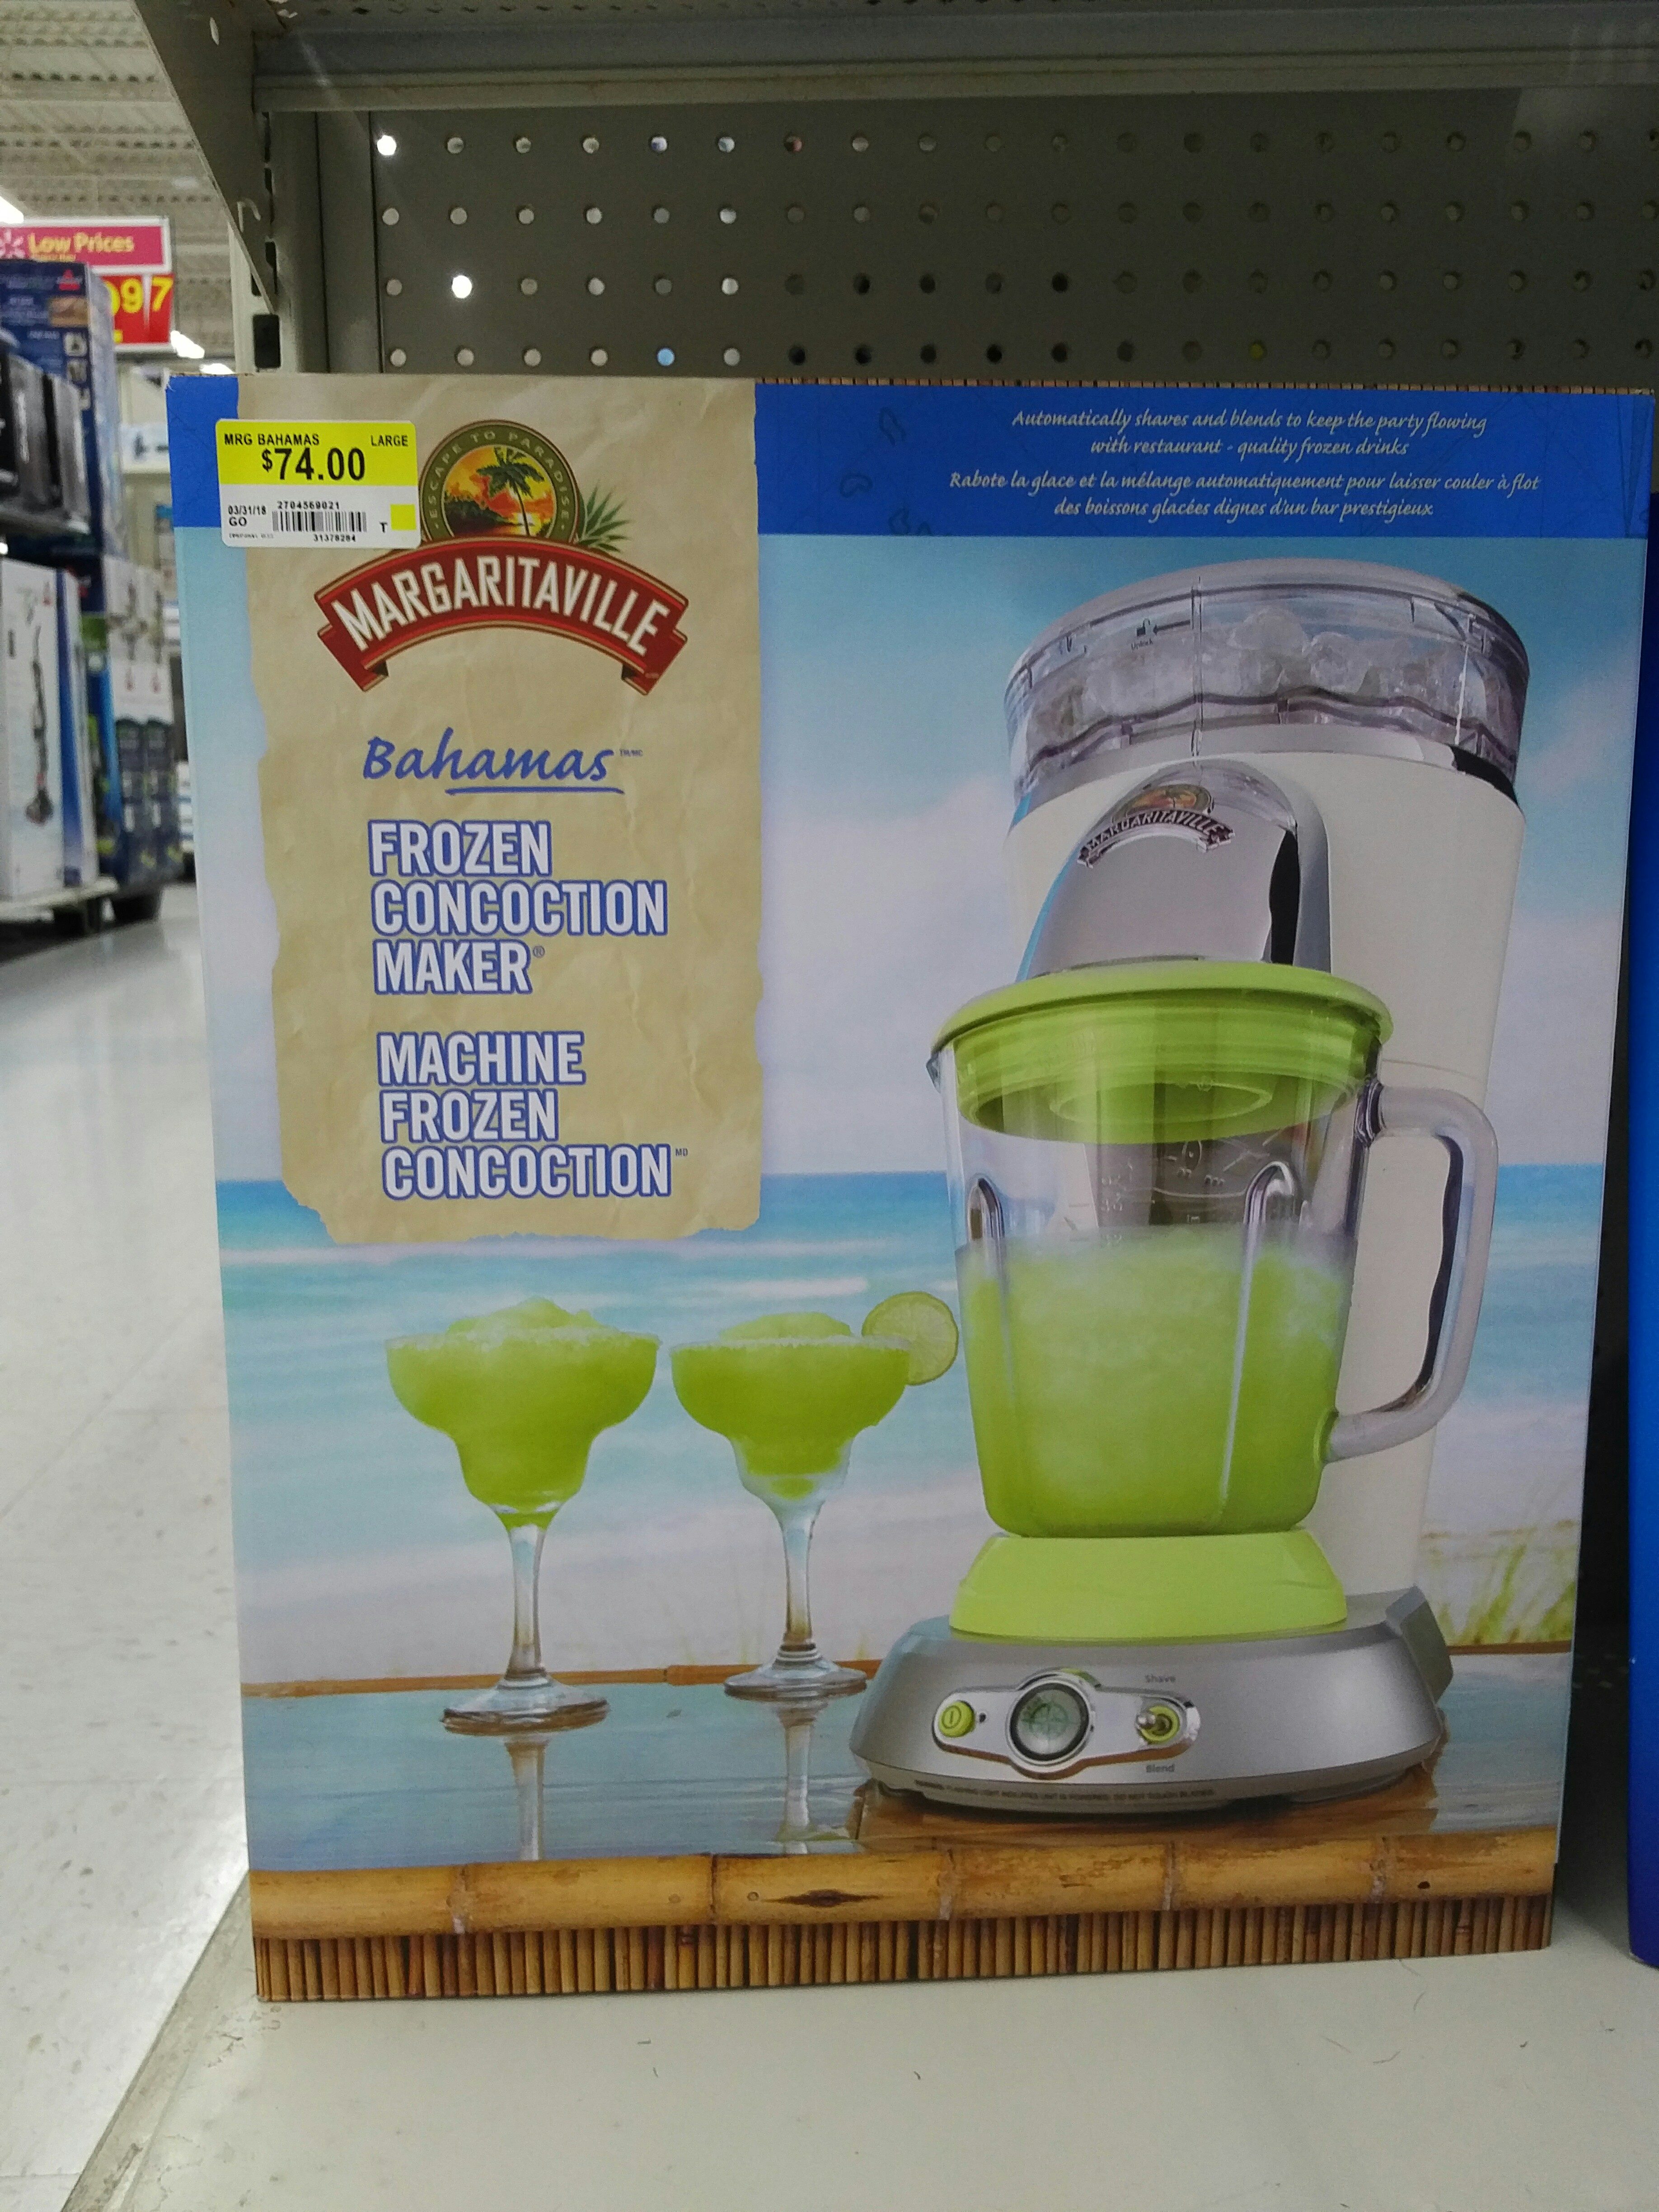 Bought a Margaritaville frozen drink machine on a whimwhat